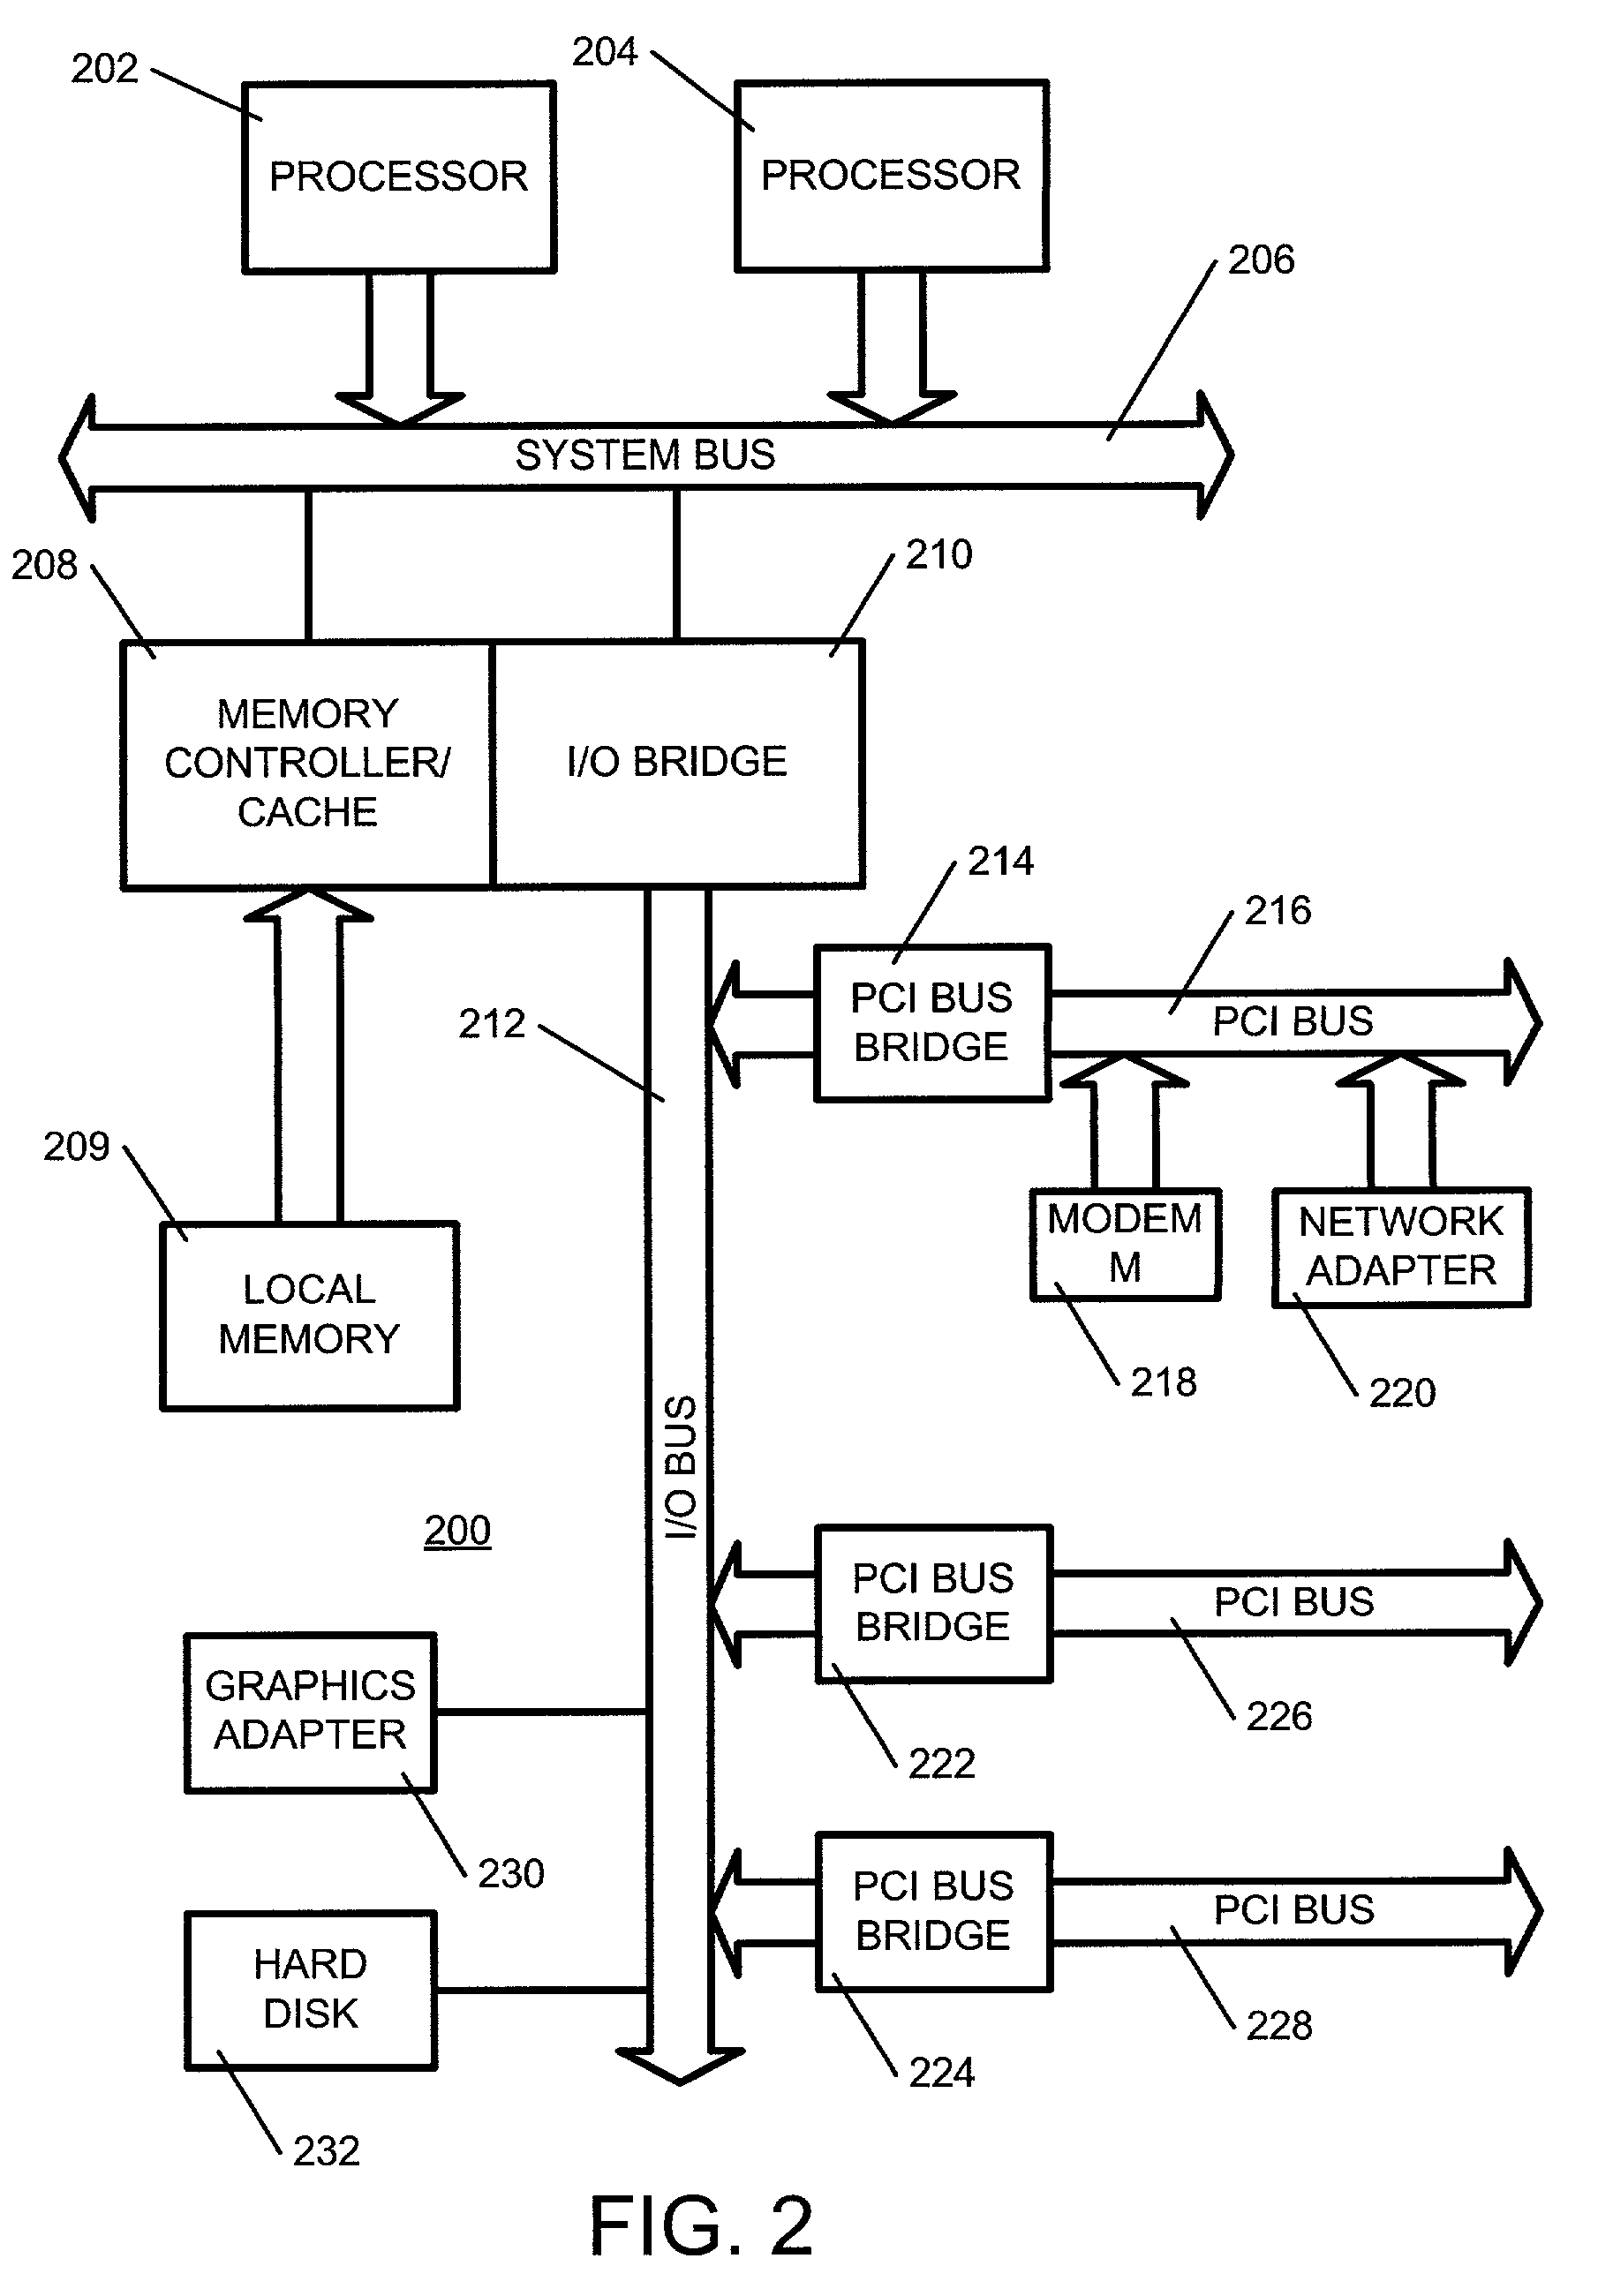 Apparatus and method of dynamically repartitioning a computer system in response to partition workloads